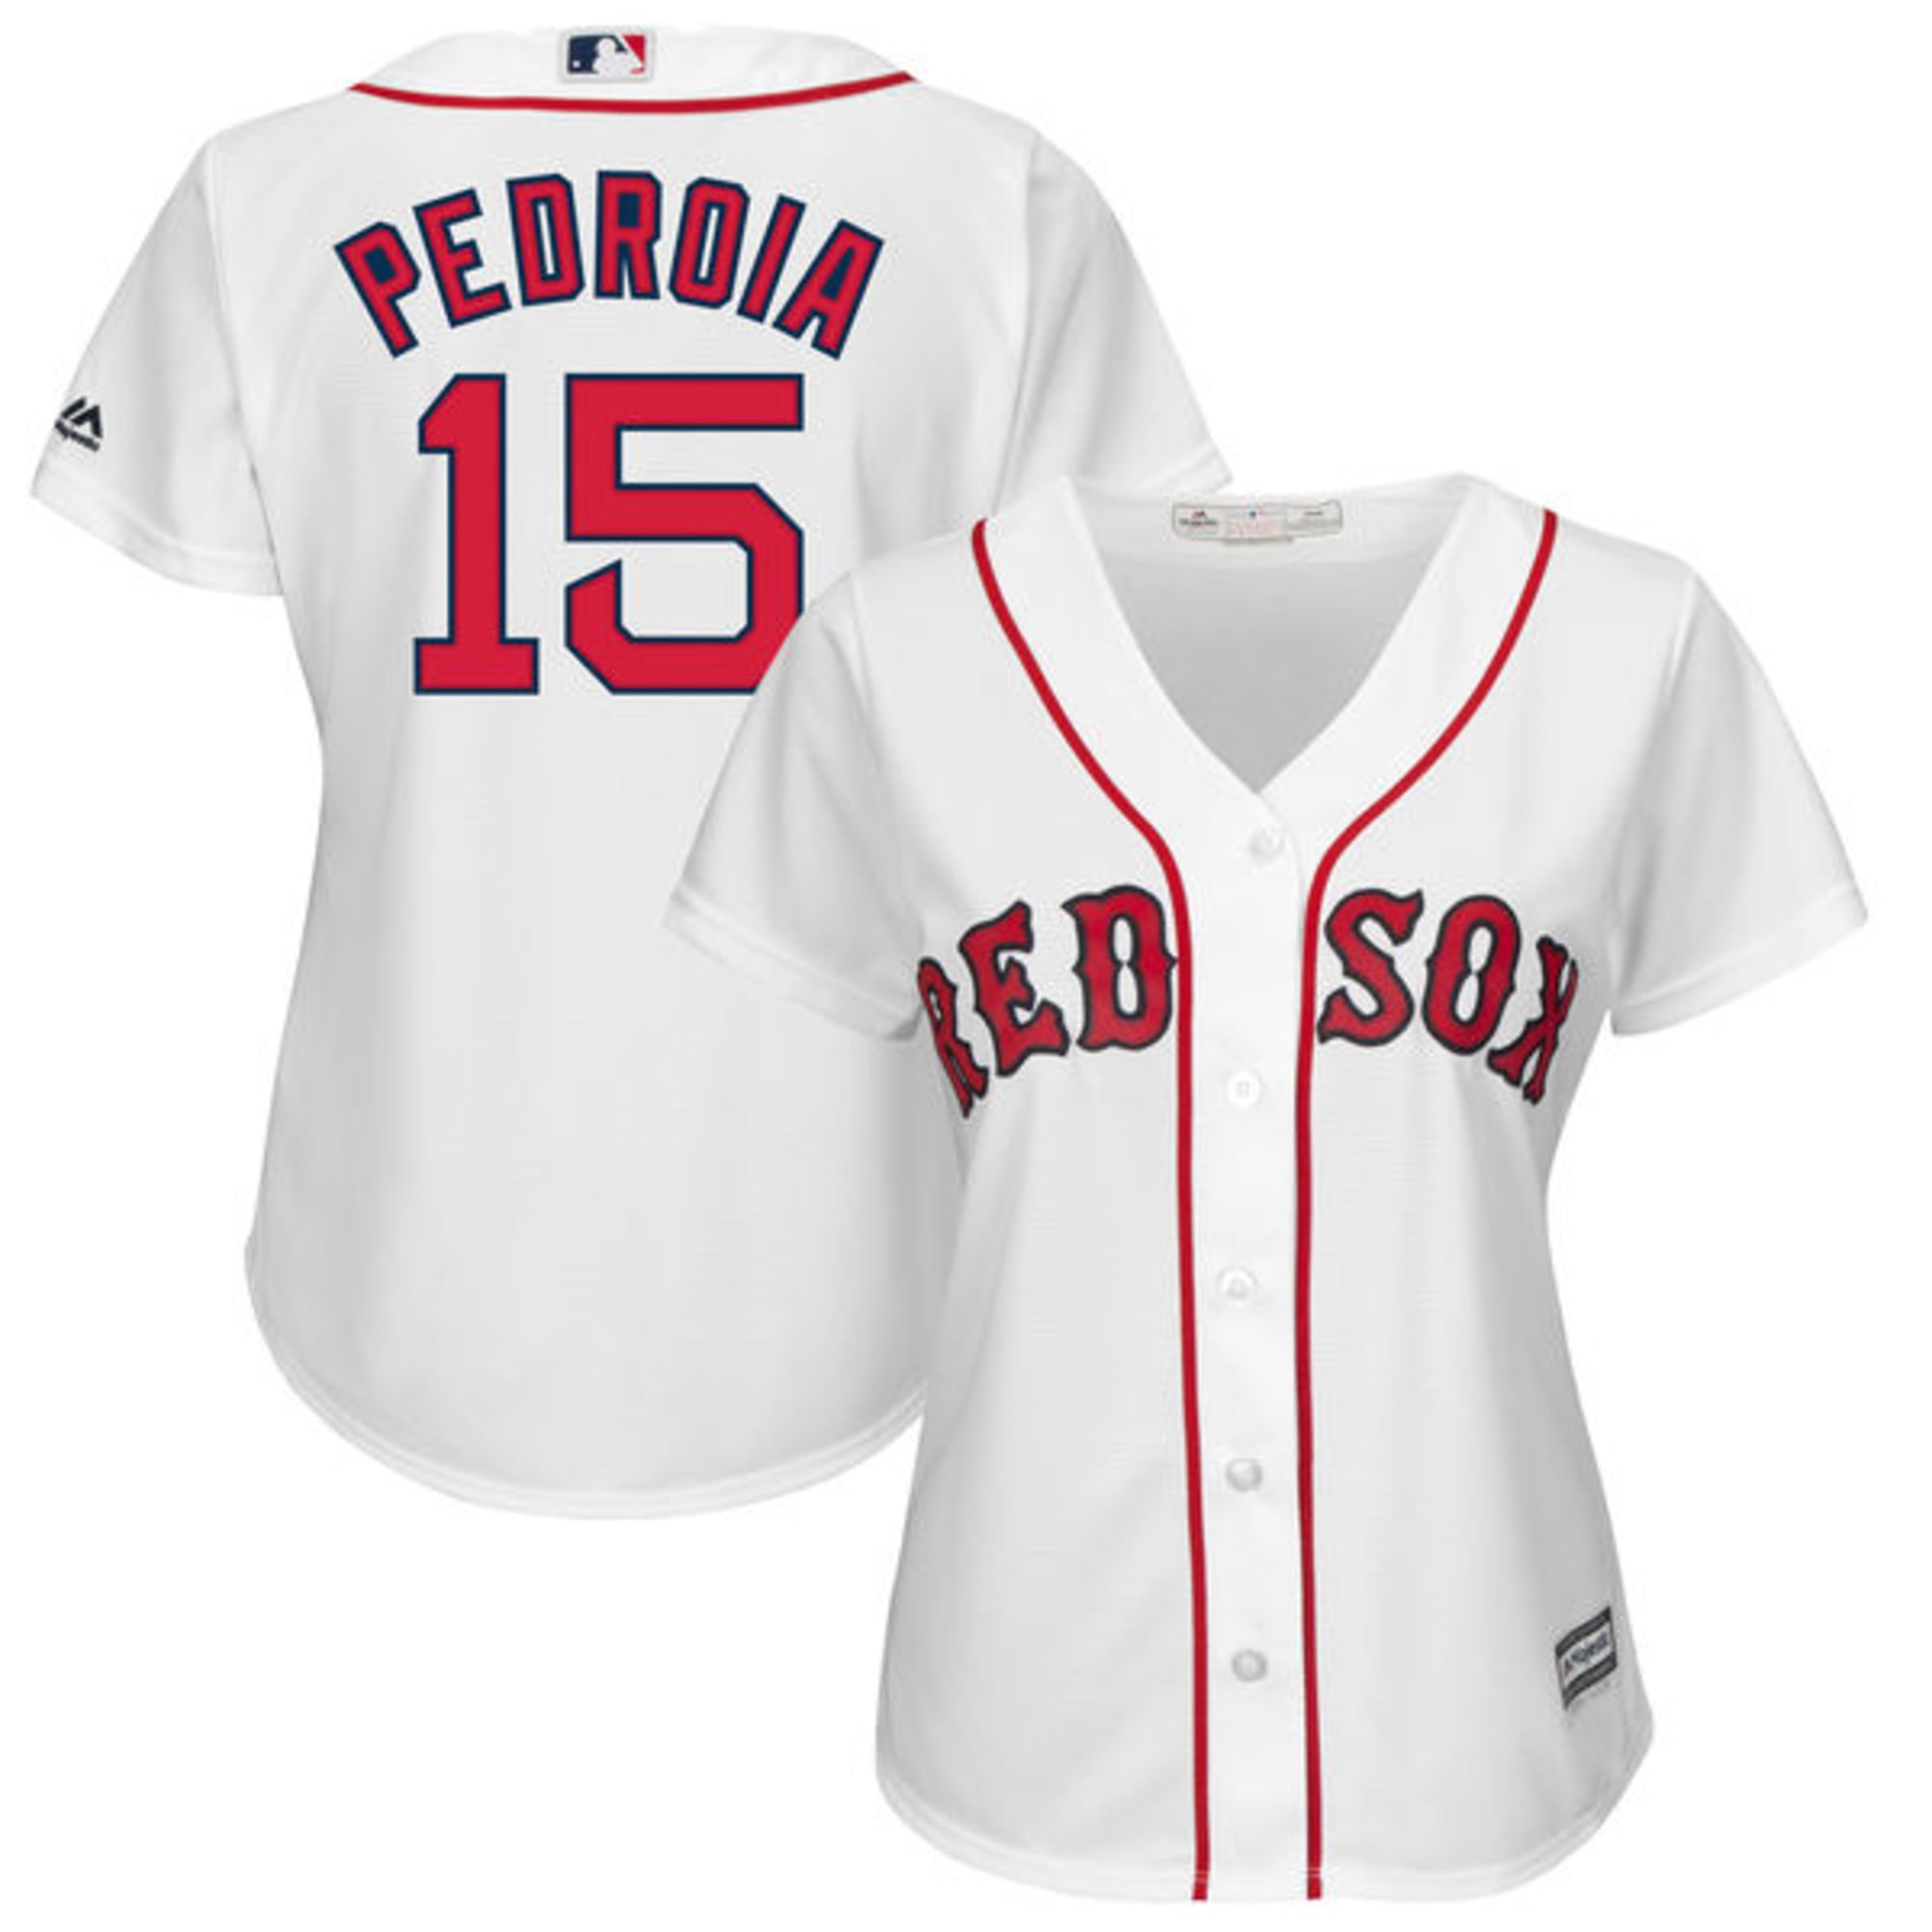 old school red sox jersey